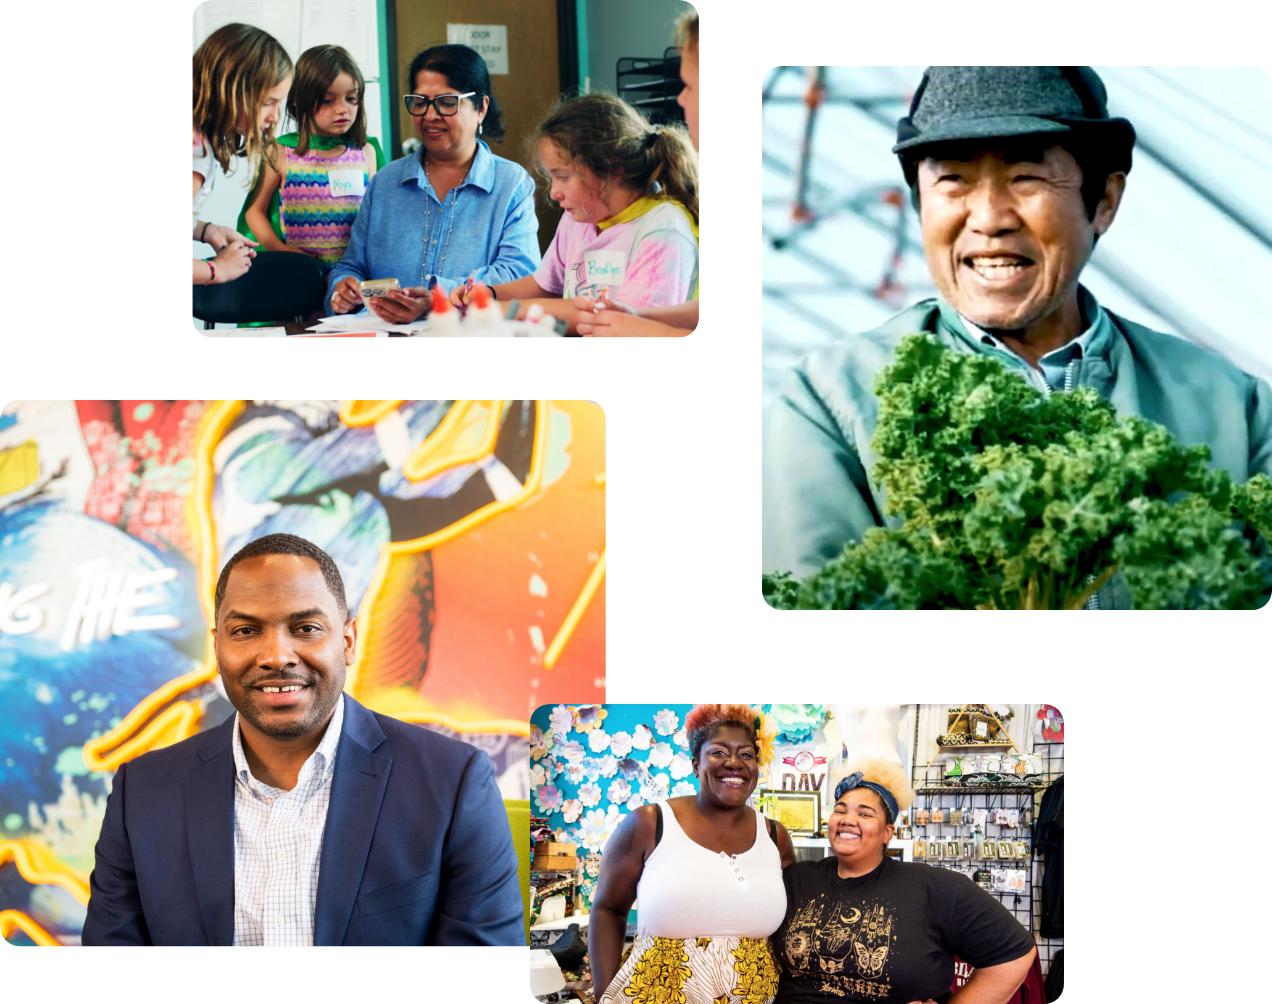 Collage image representing different small business owners across Wisconsin